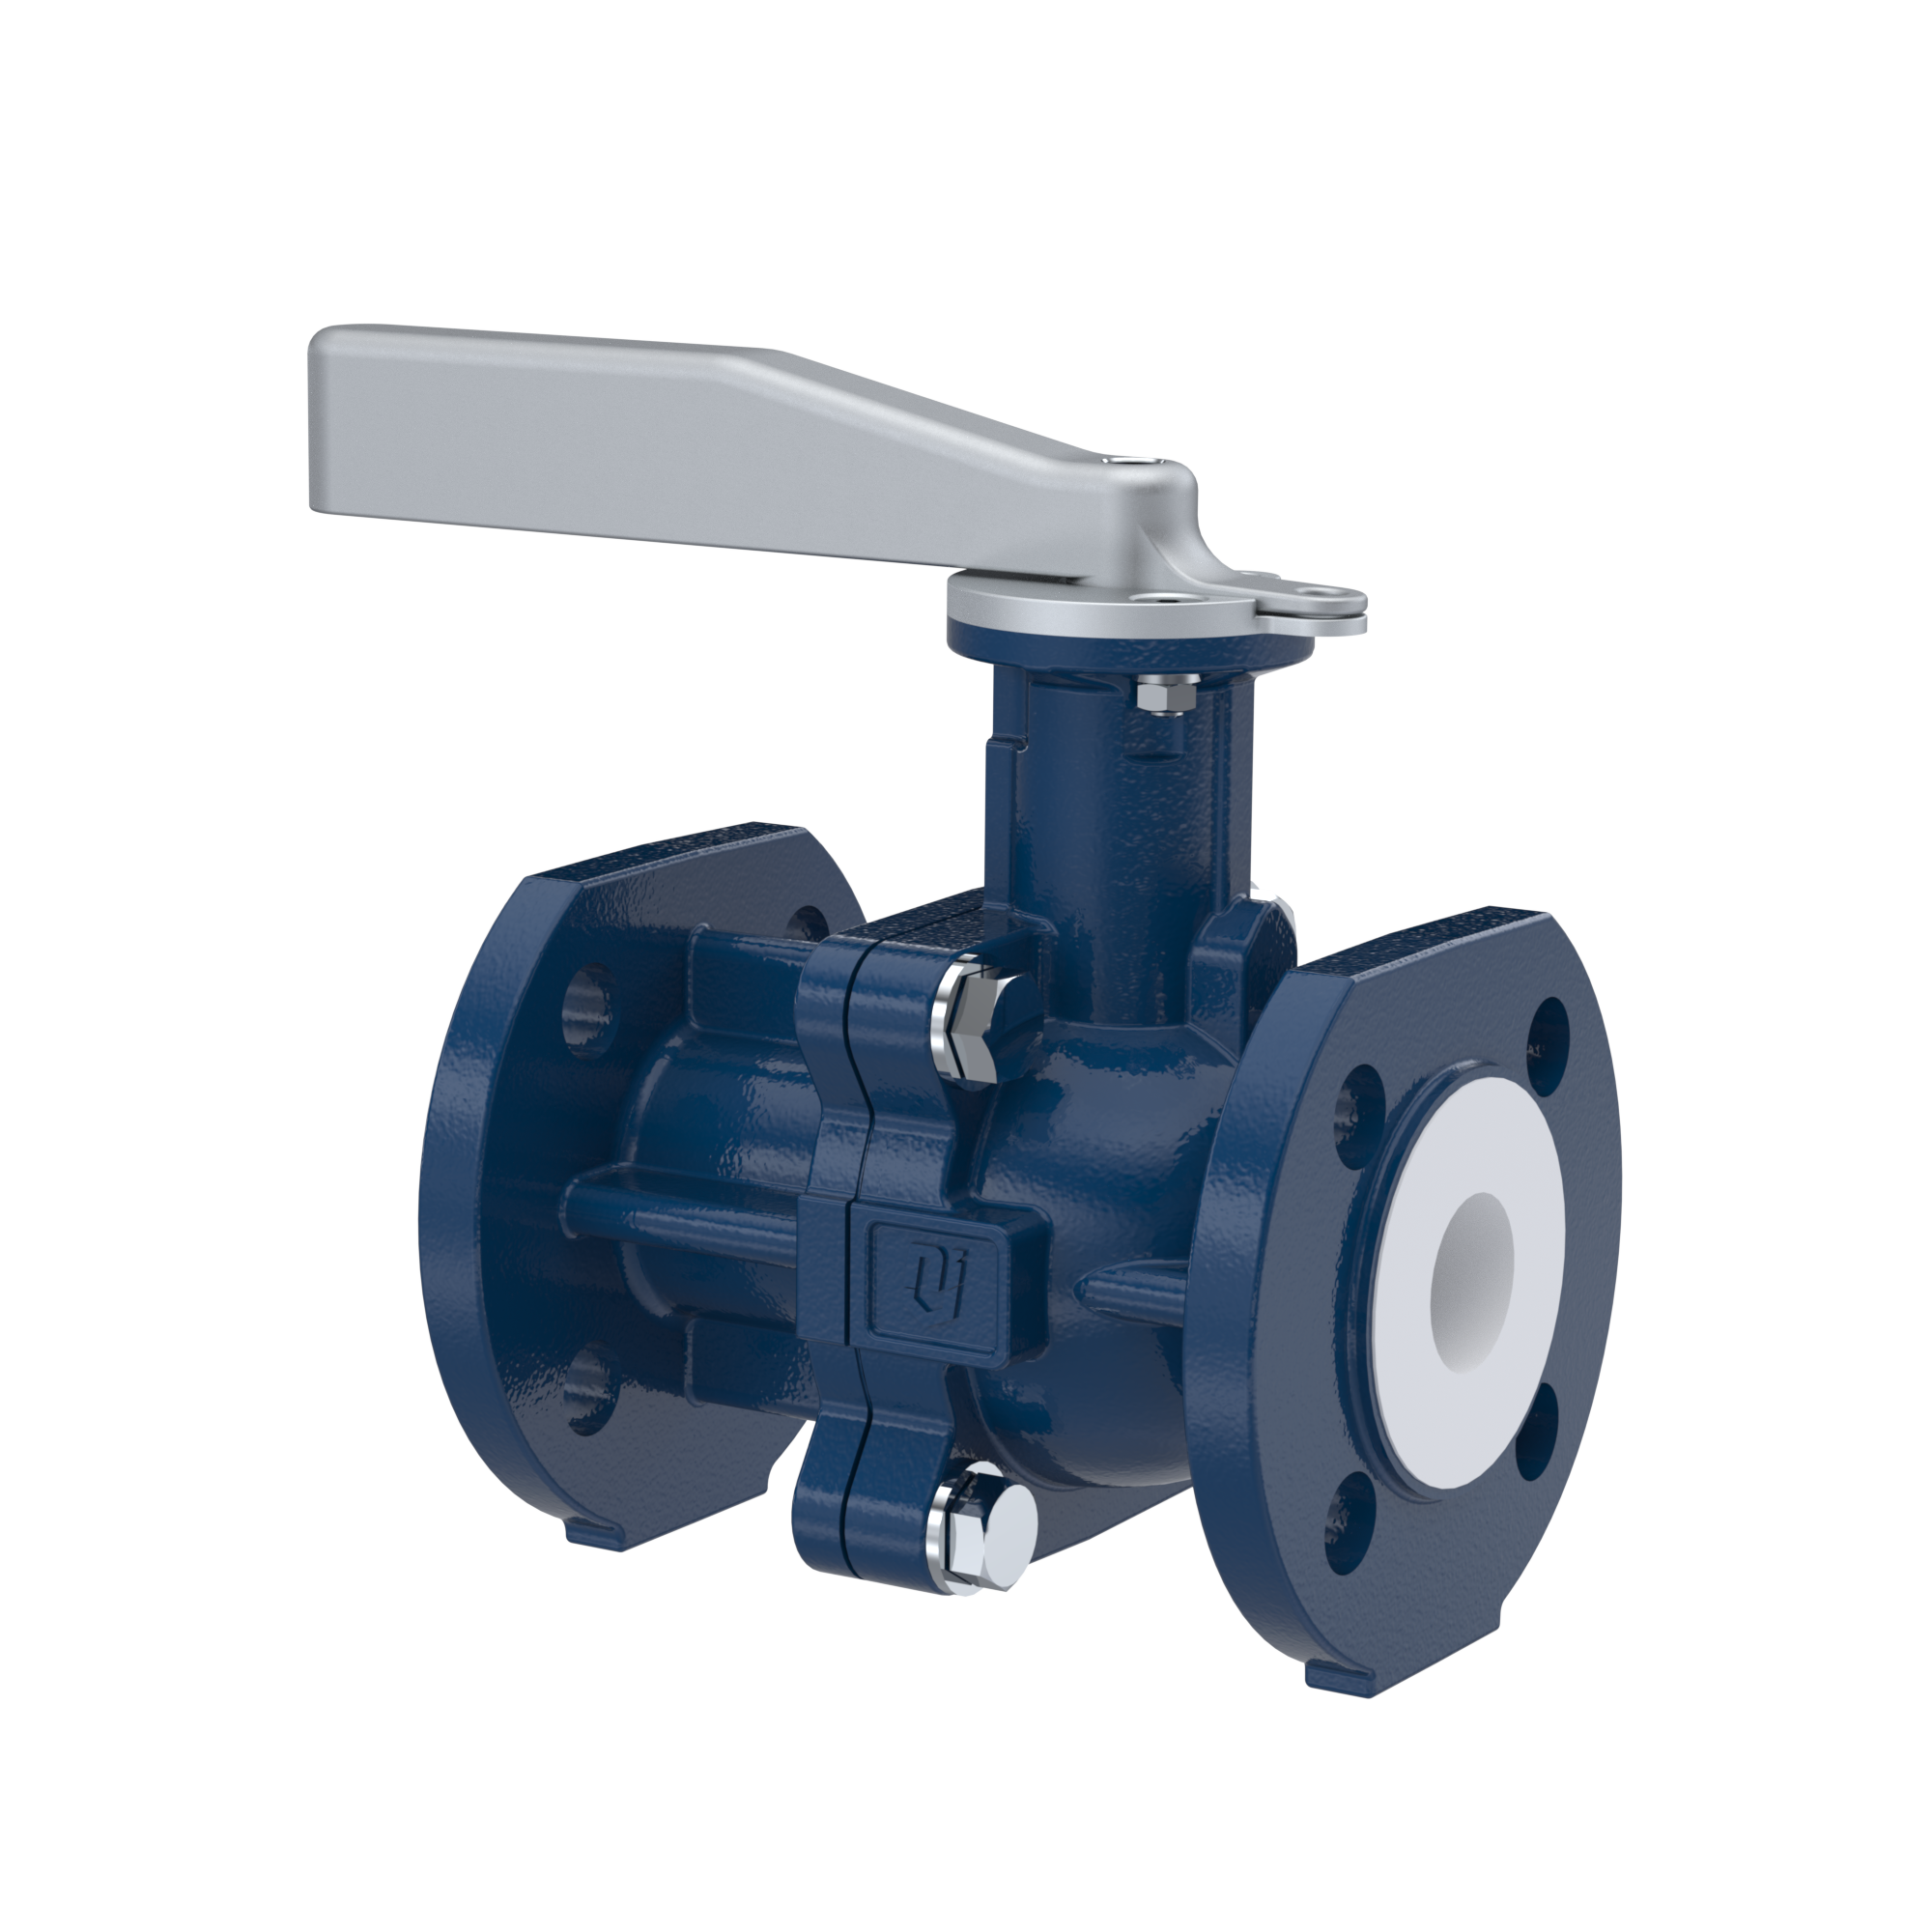 PFA-flange ball valve FK13 DN50 - 2" inch PN10/16 made of spheroidal graphite cast iron with lever hand